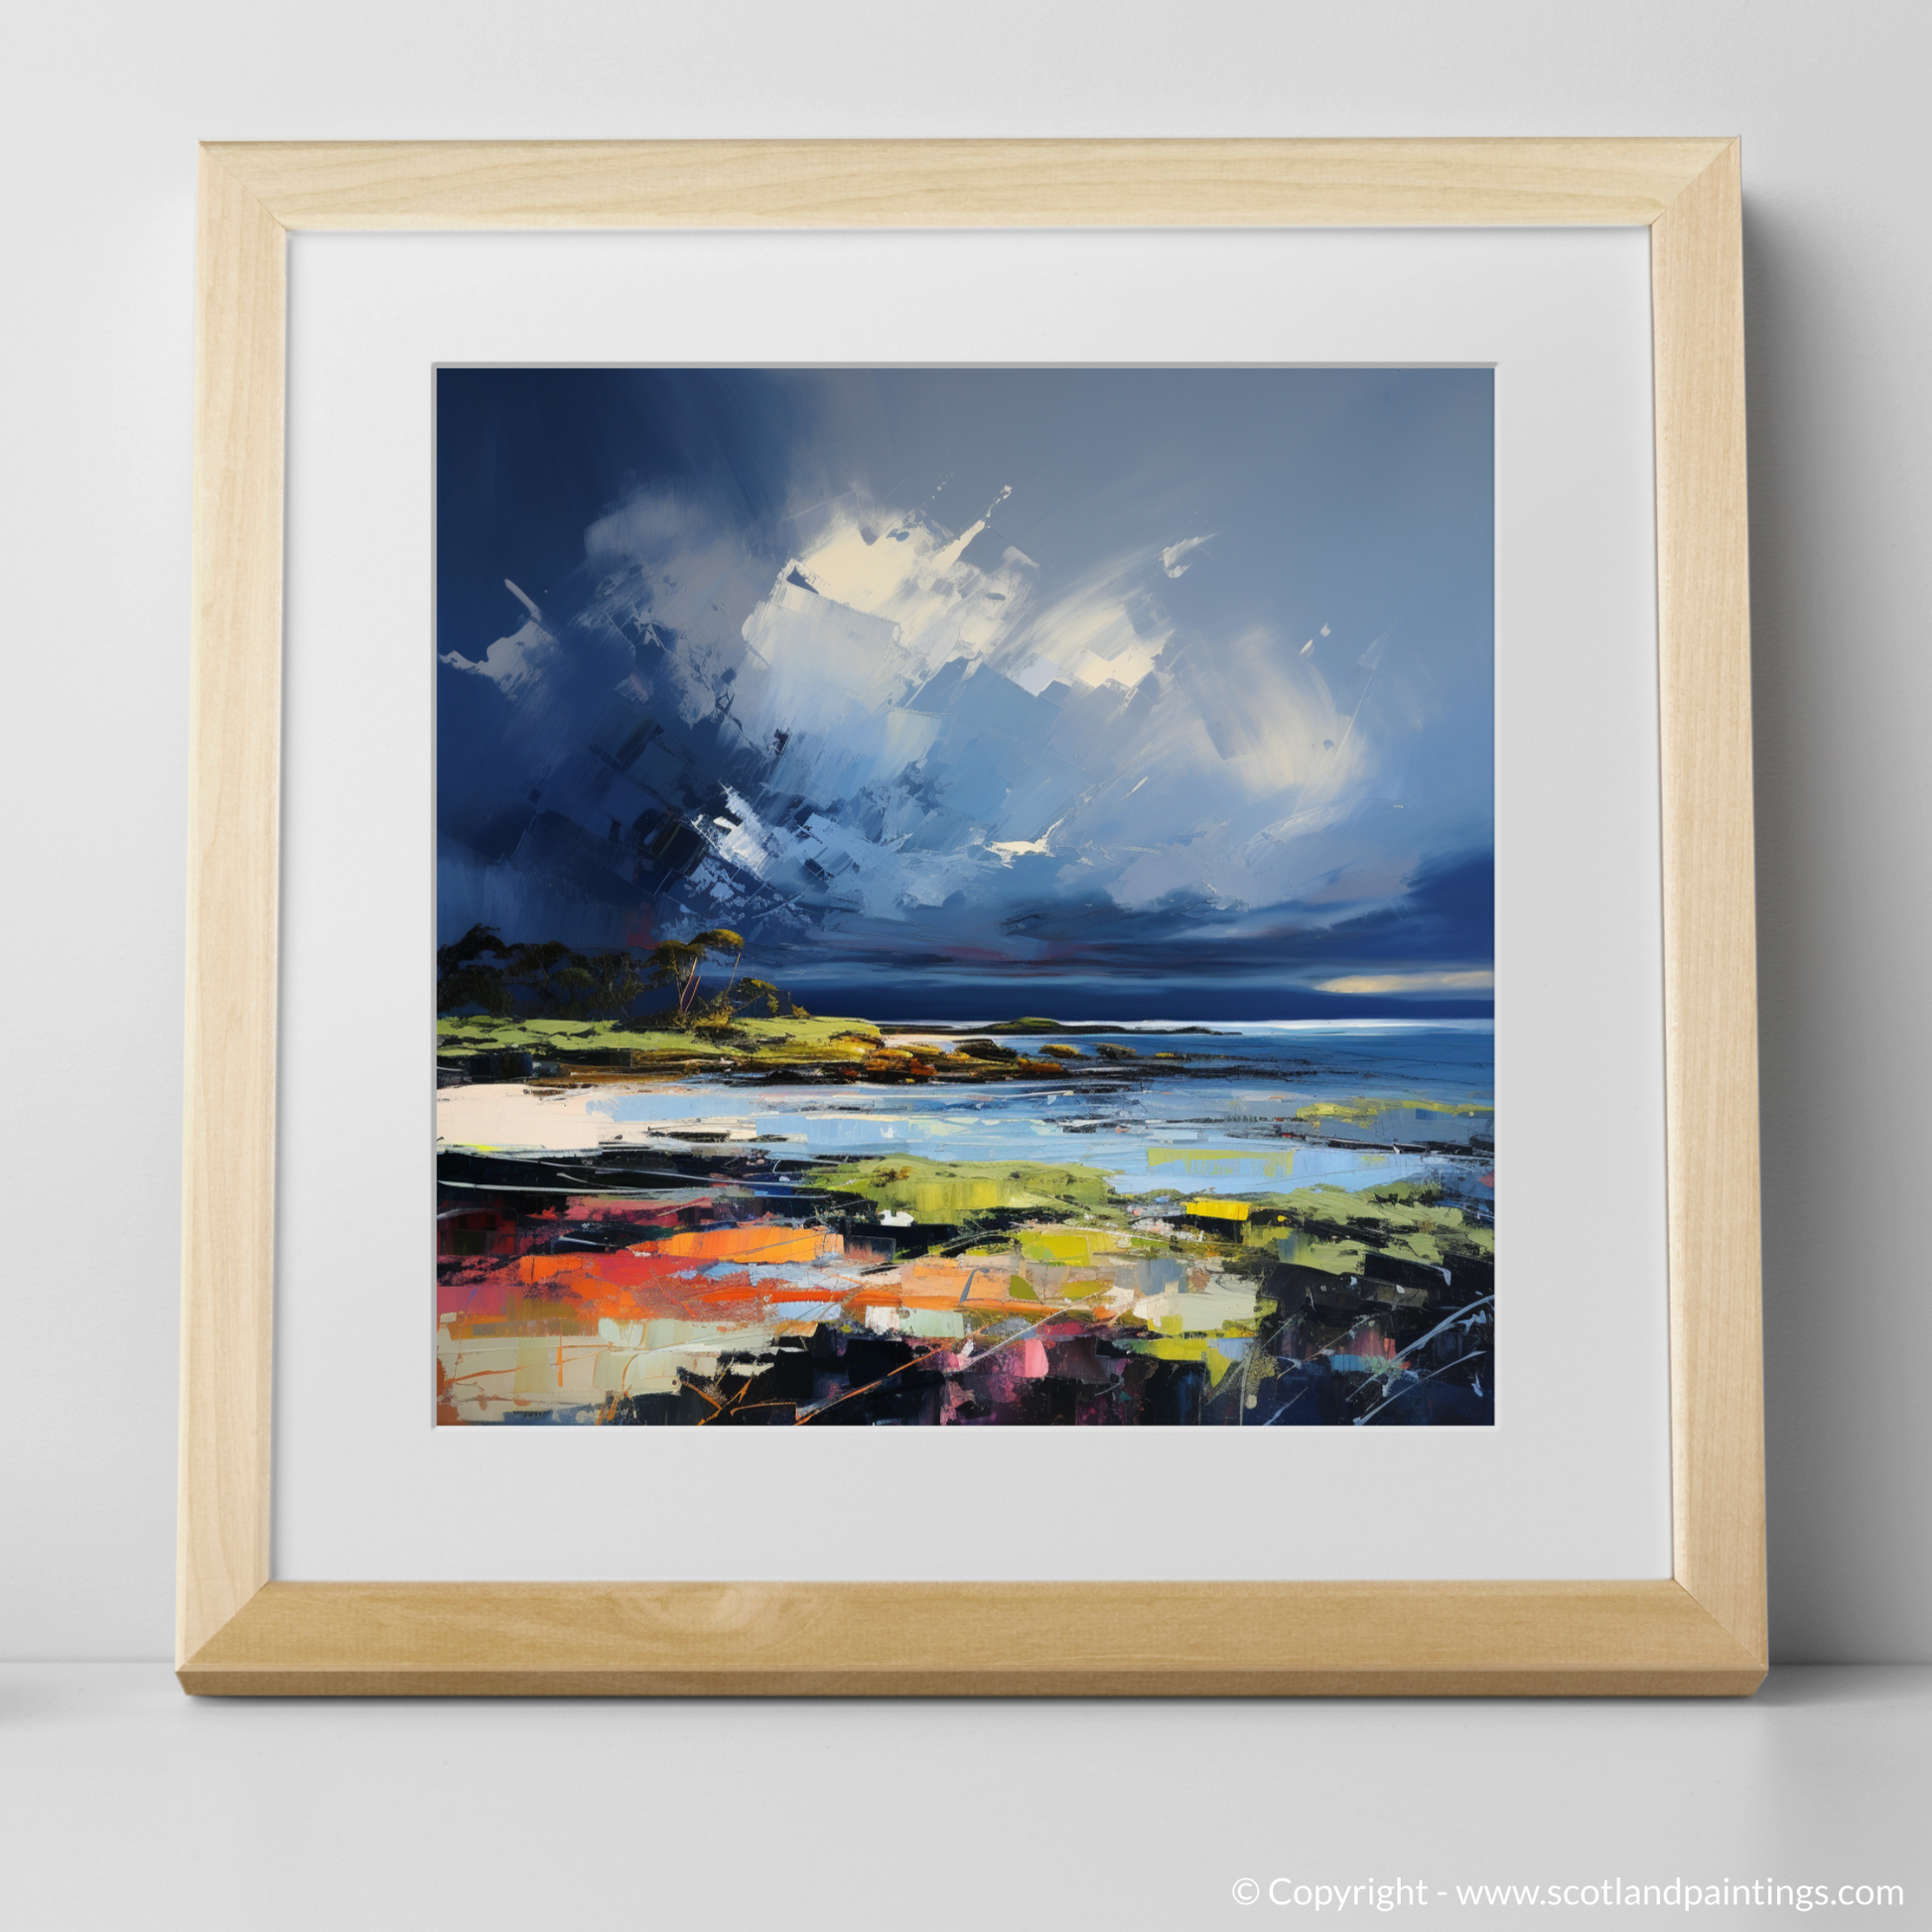 Art Print of Largo Bay with a stormy sky with a natural frame